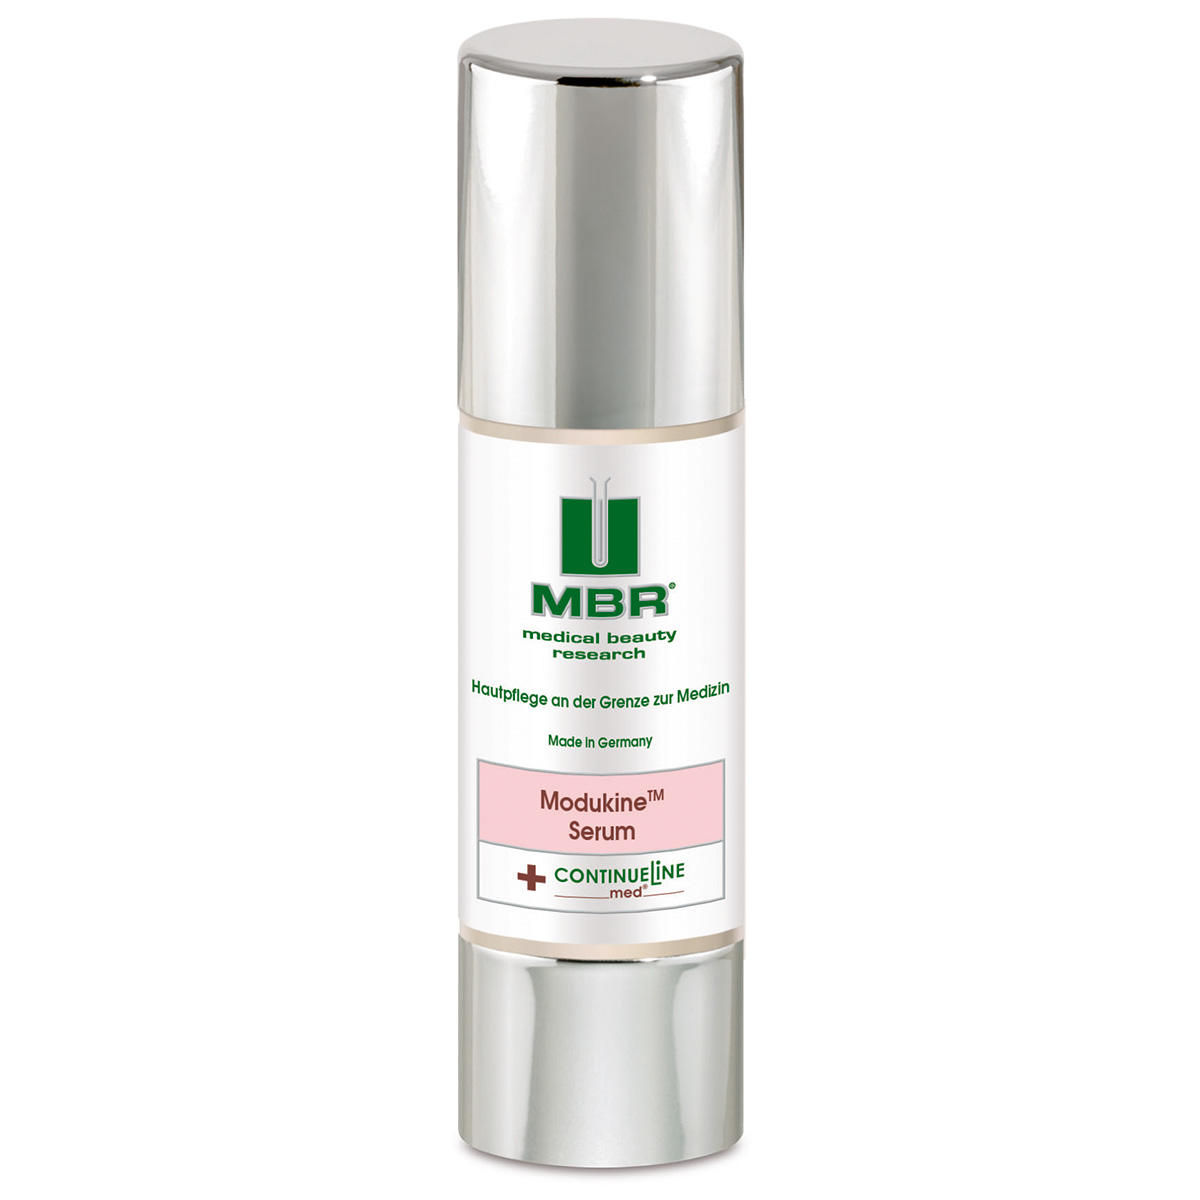 MBR Medical Beauty Research ContinueLine med Modukine Serum 50 ml - 1